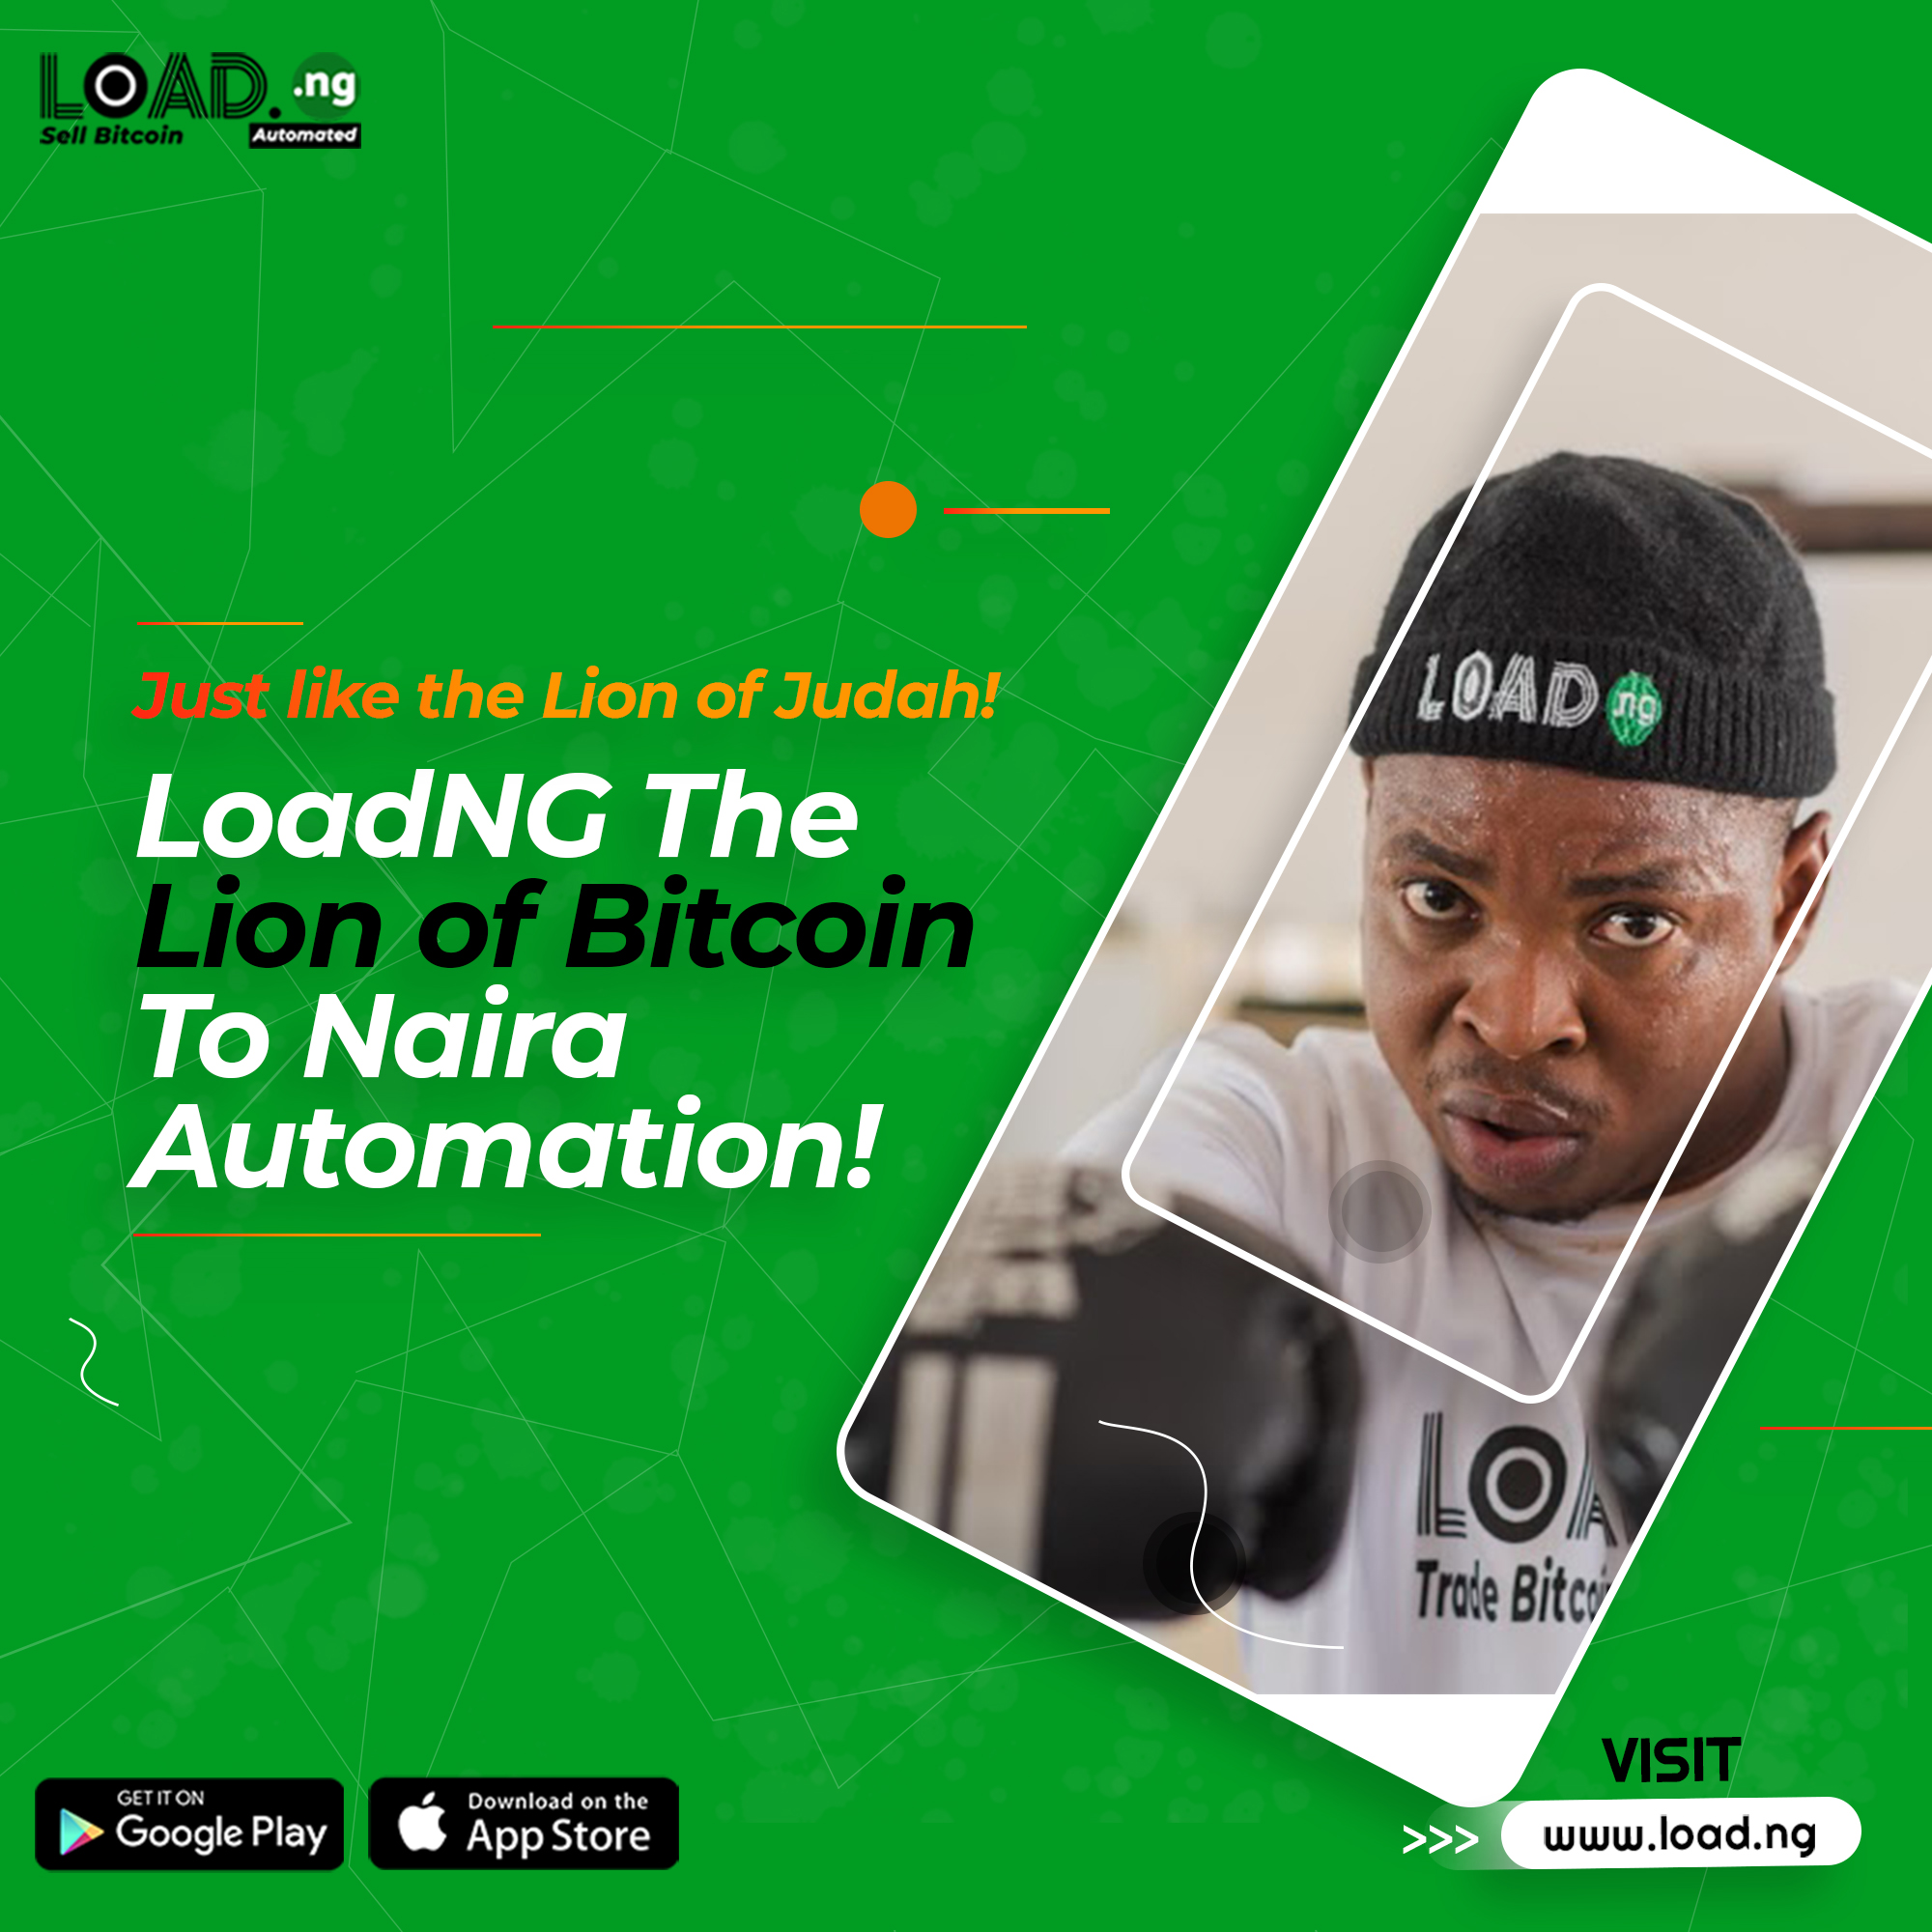 How To Sell Paxful Bitcoin To Naira On LoadNG